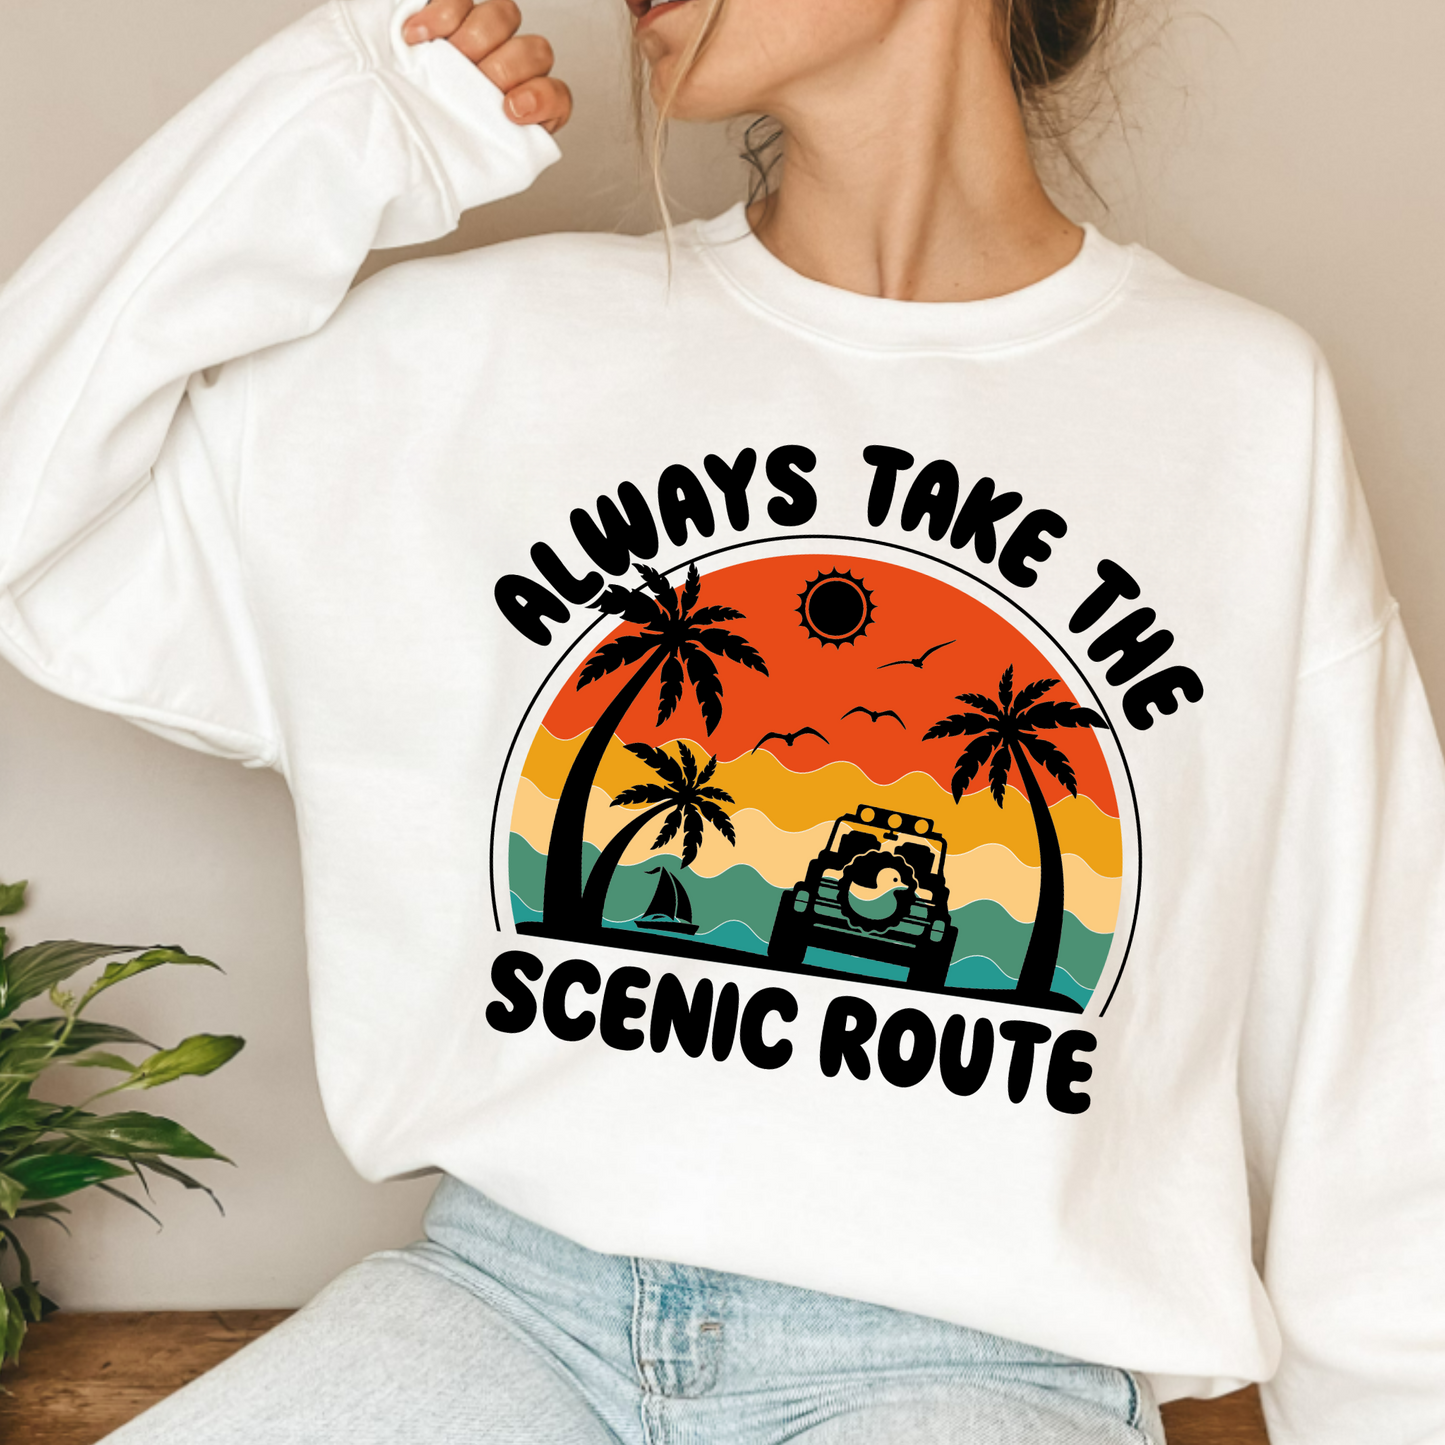 (shirt not included) Always take the scenic route - Clear Film Transfer